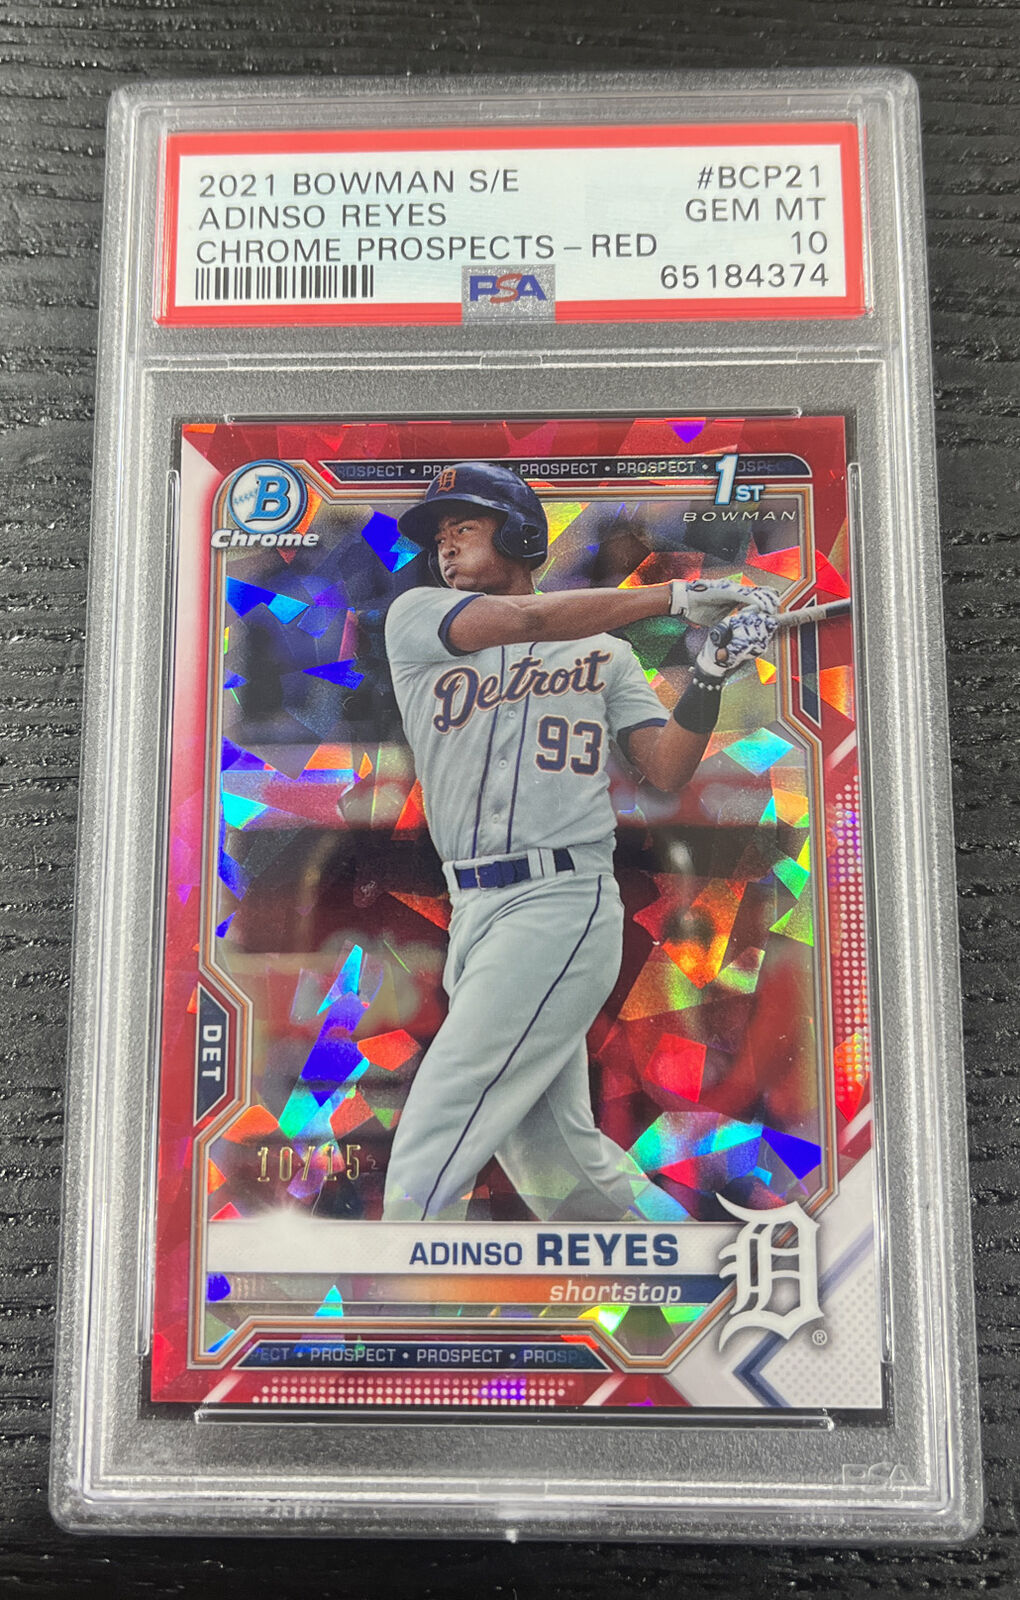 2021 Bowman Chrome Sapphire Red Refractor Adinso Reyes BCP21 PSA 10